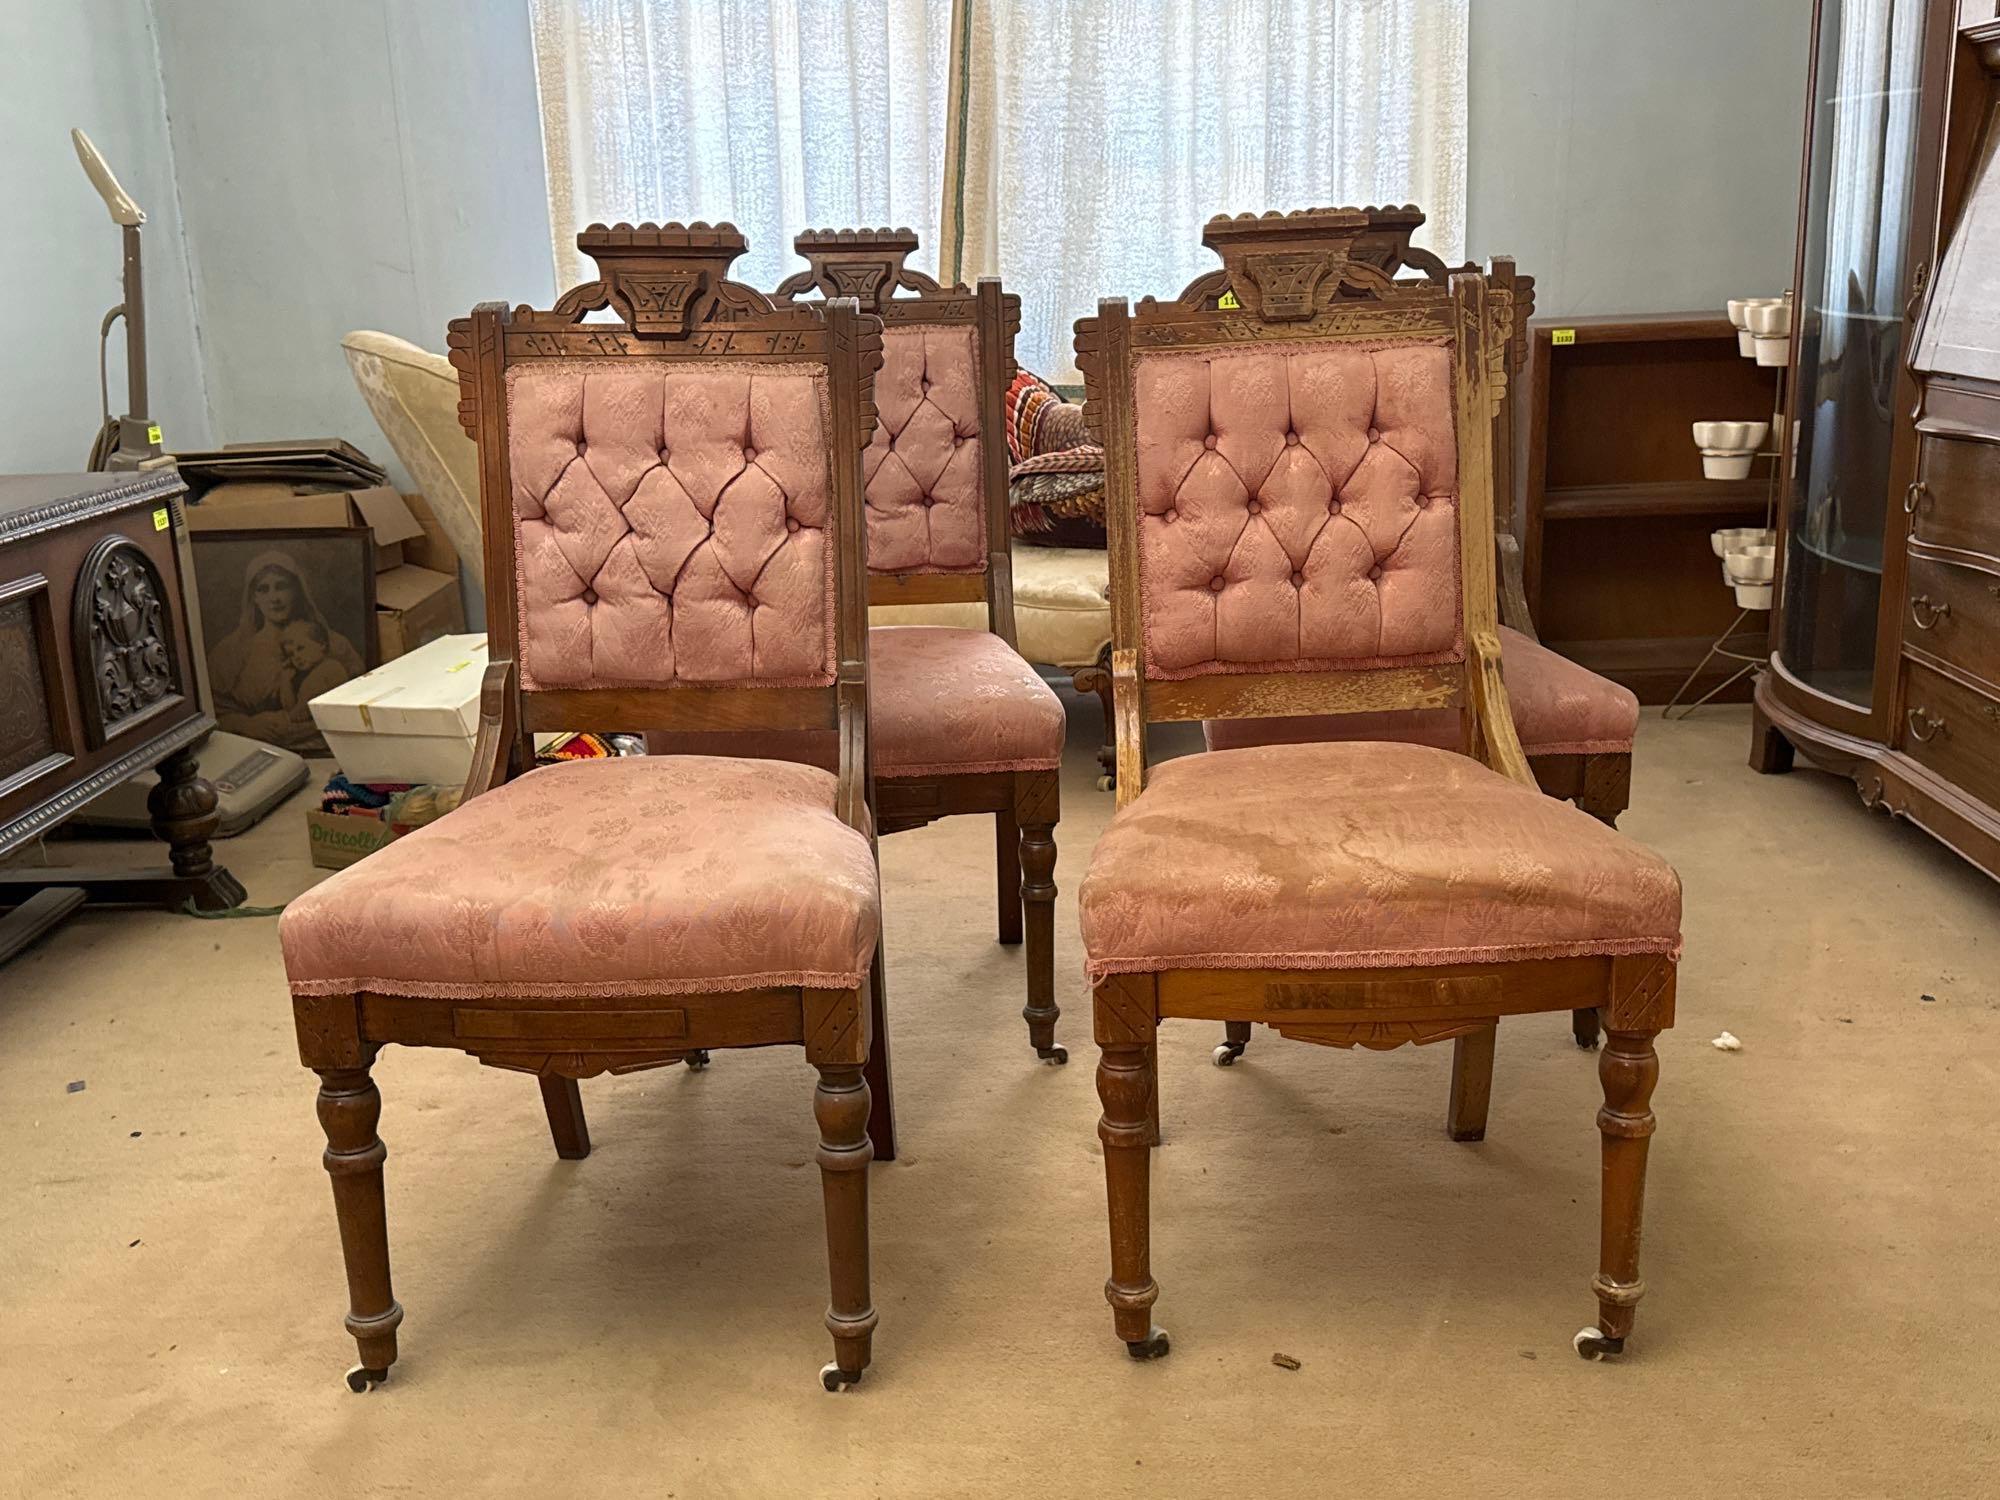 Antique Pink Upholstered Chairs